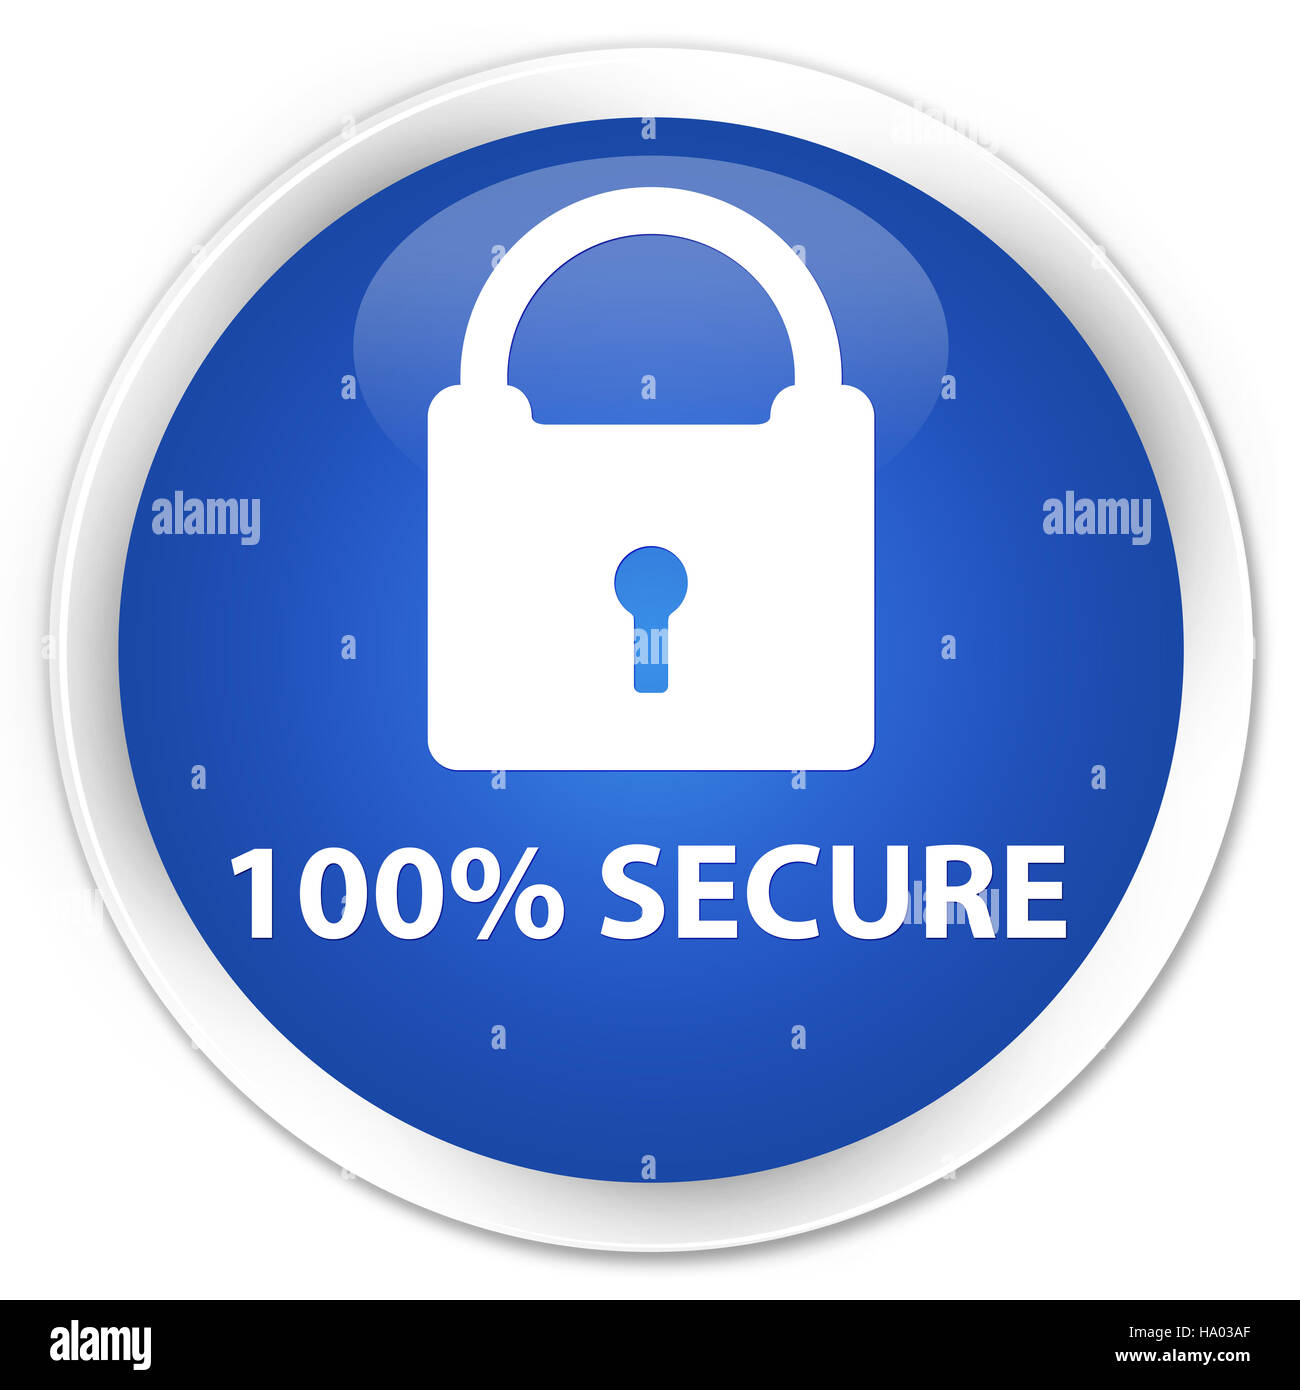 100% secure isolated on premium blue round button abstract illustration Stock Photo